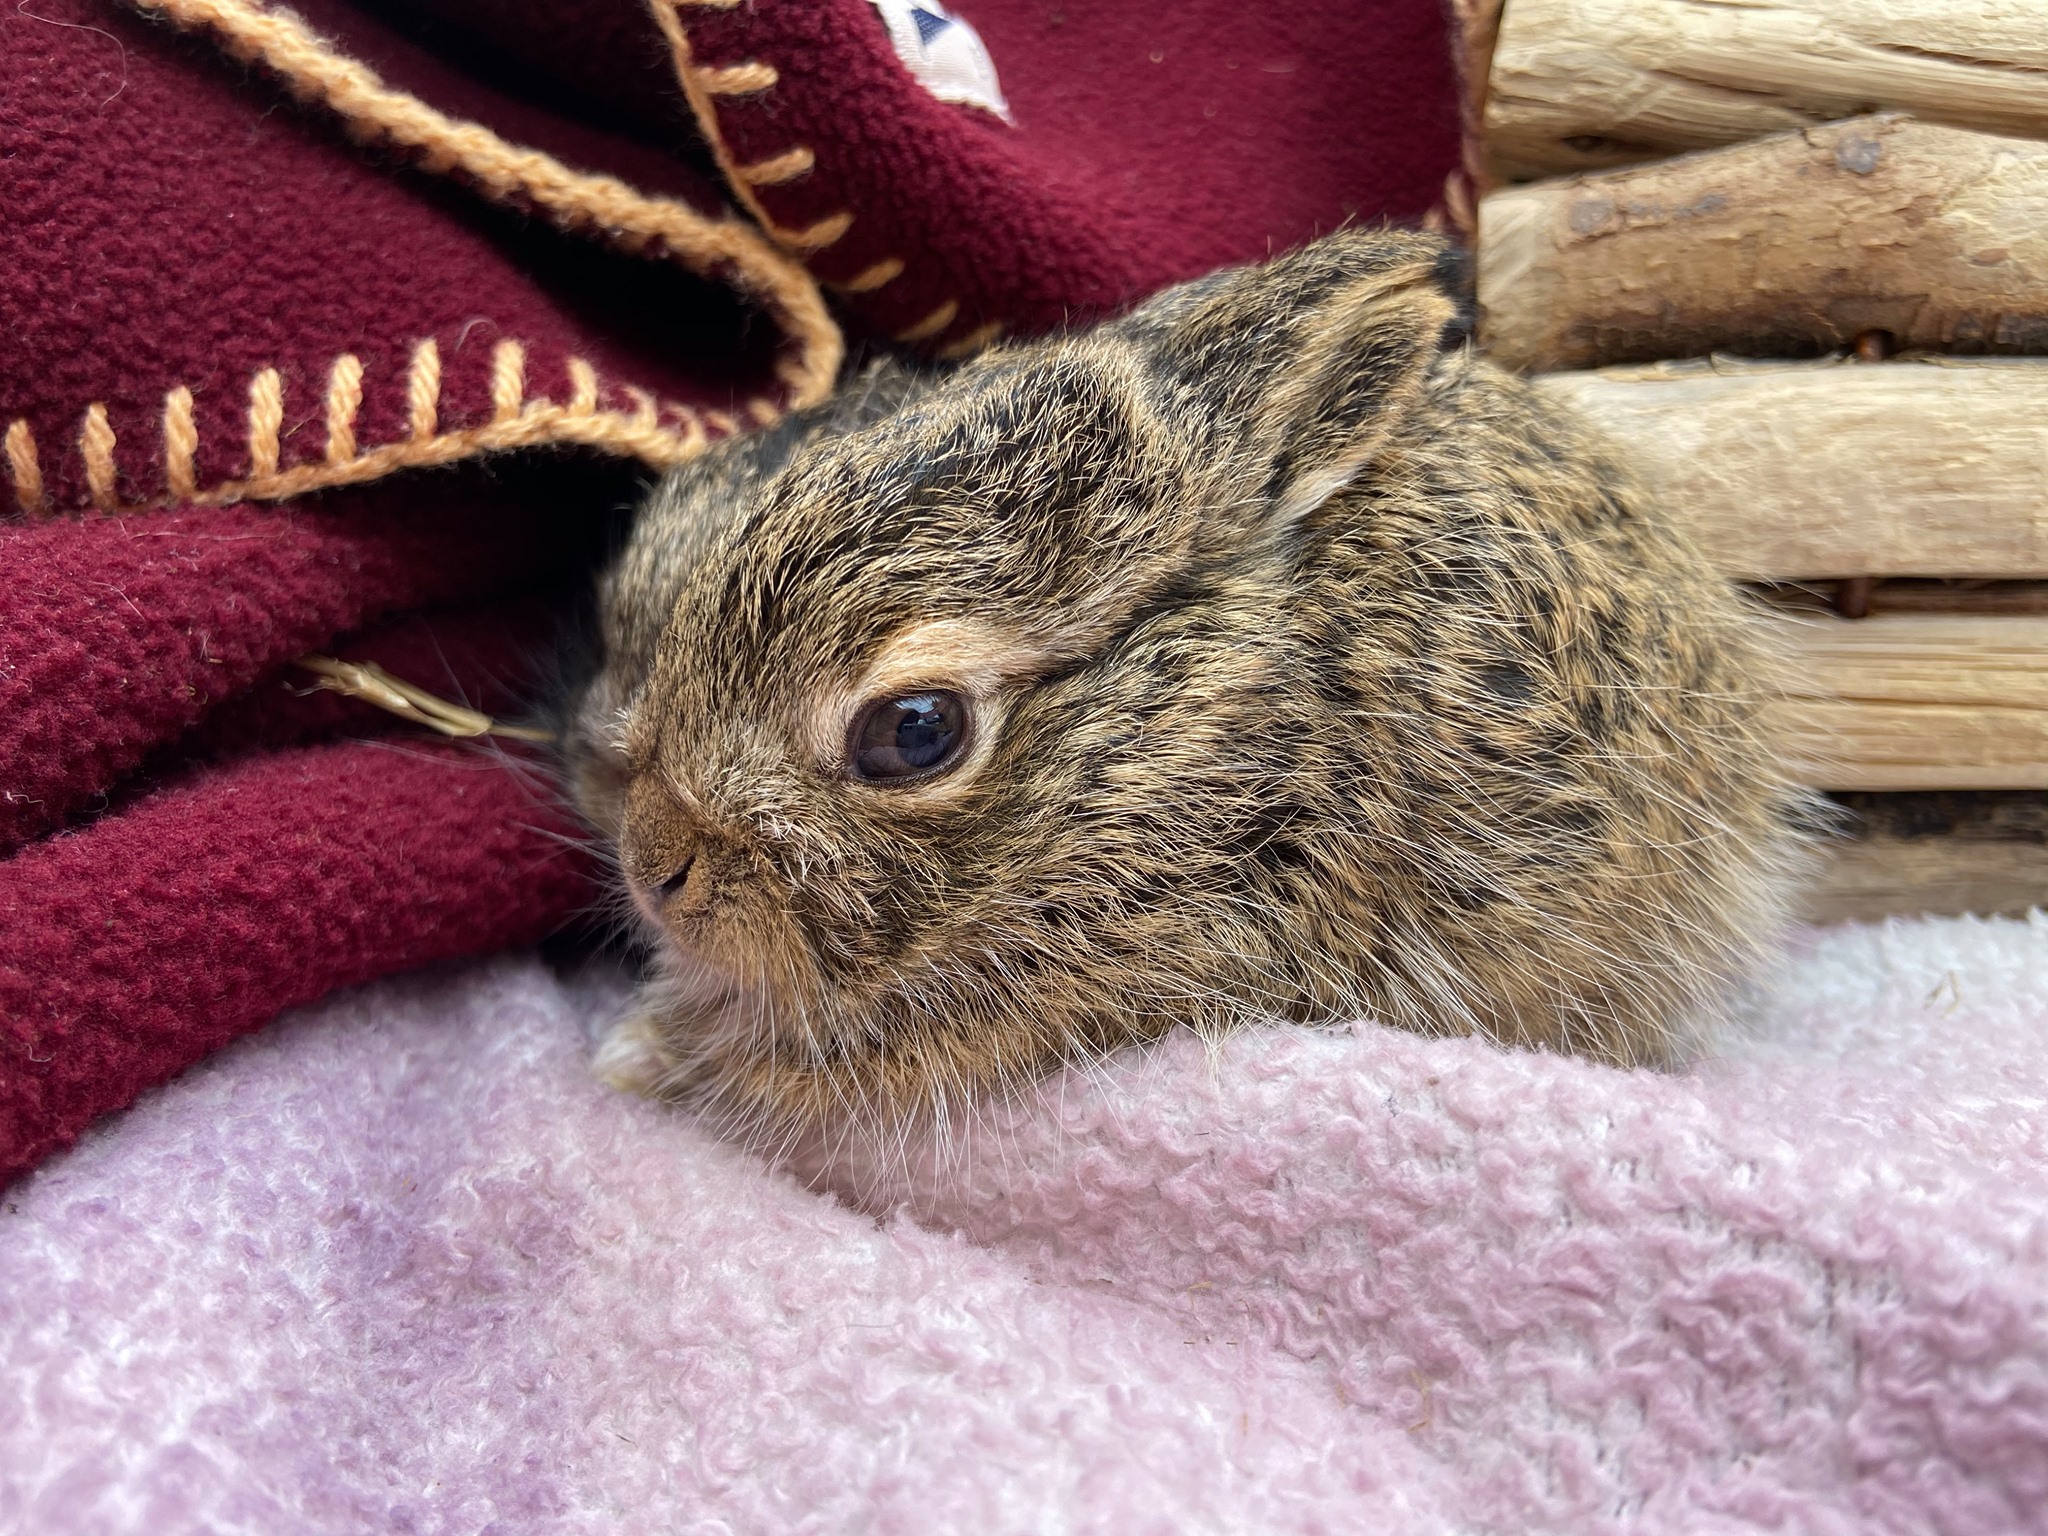 Photograph of a baby hare, which looks similar to the Hare mascot